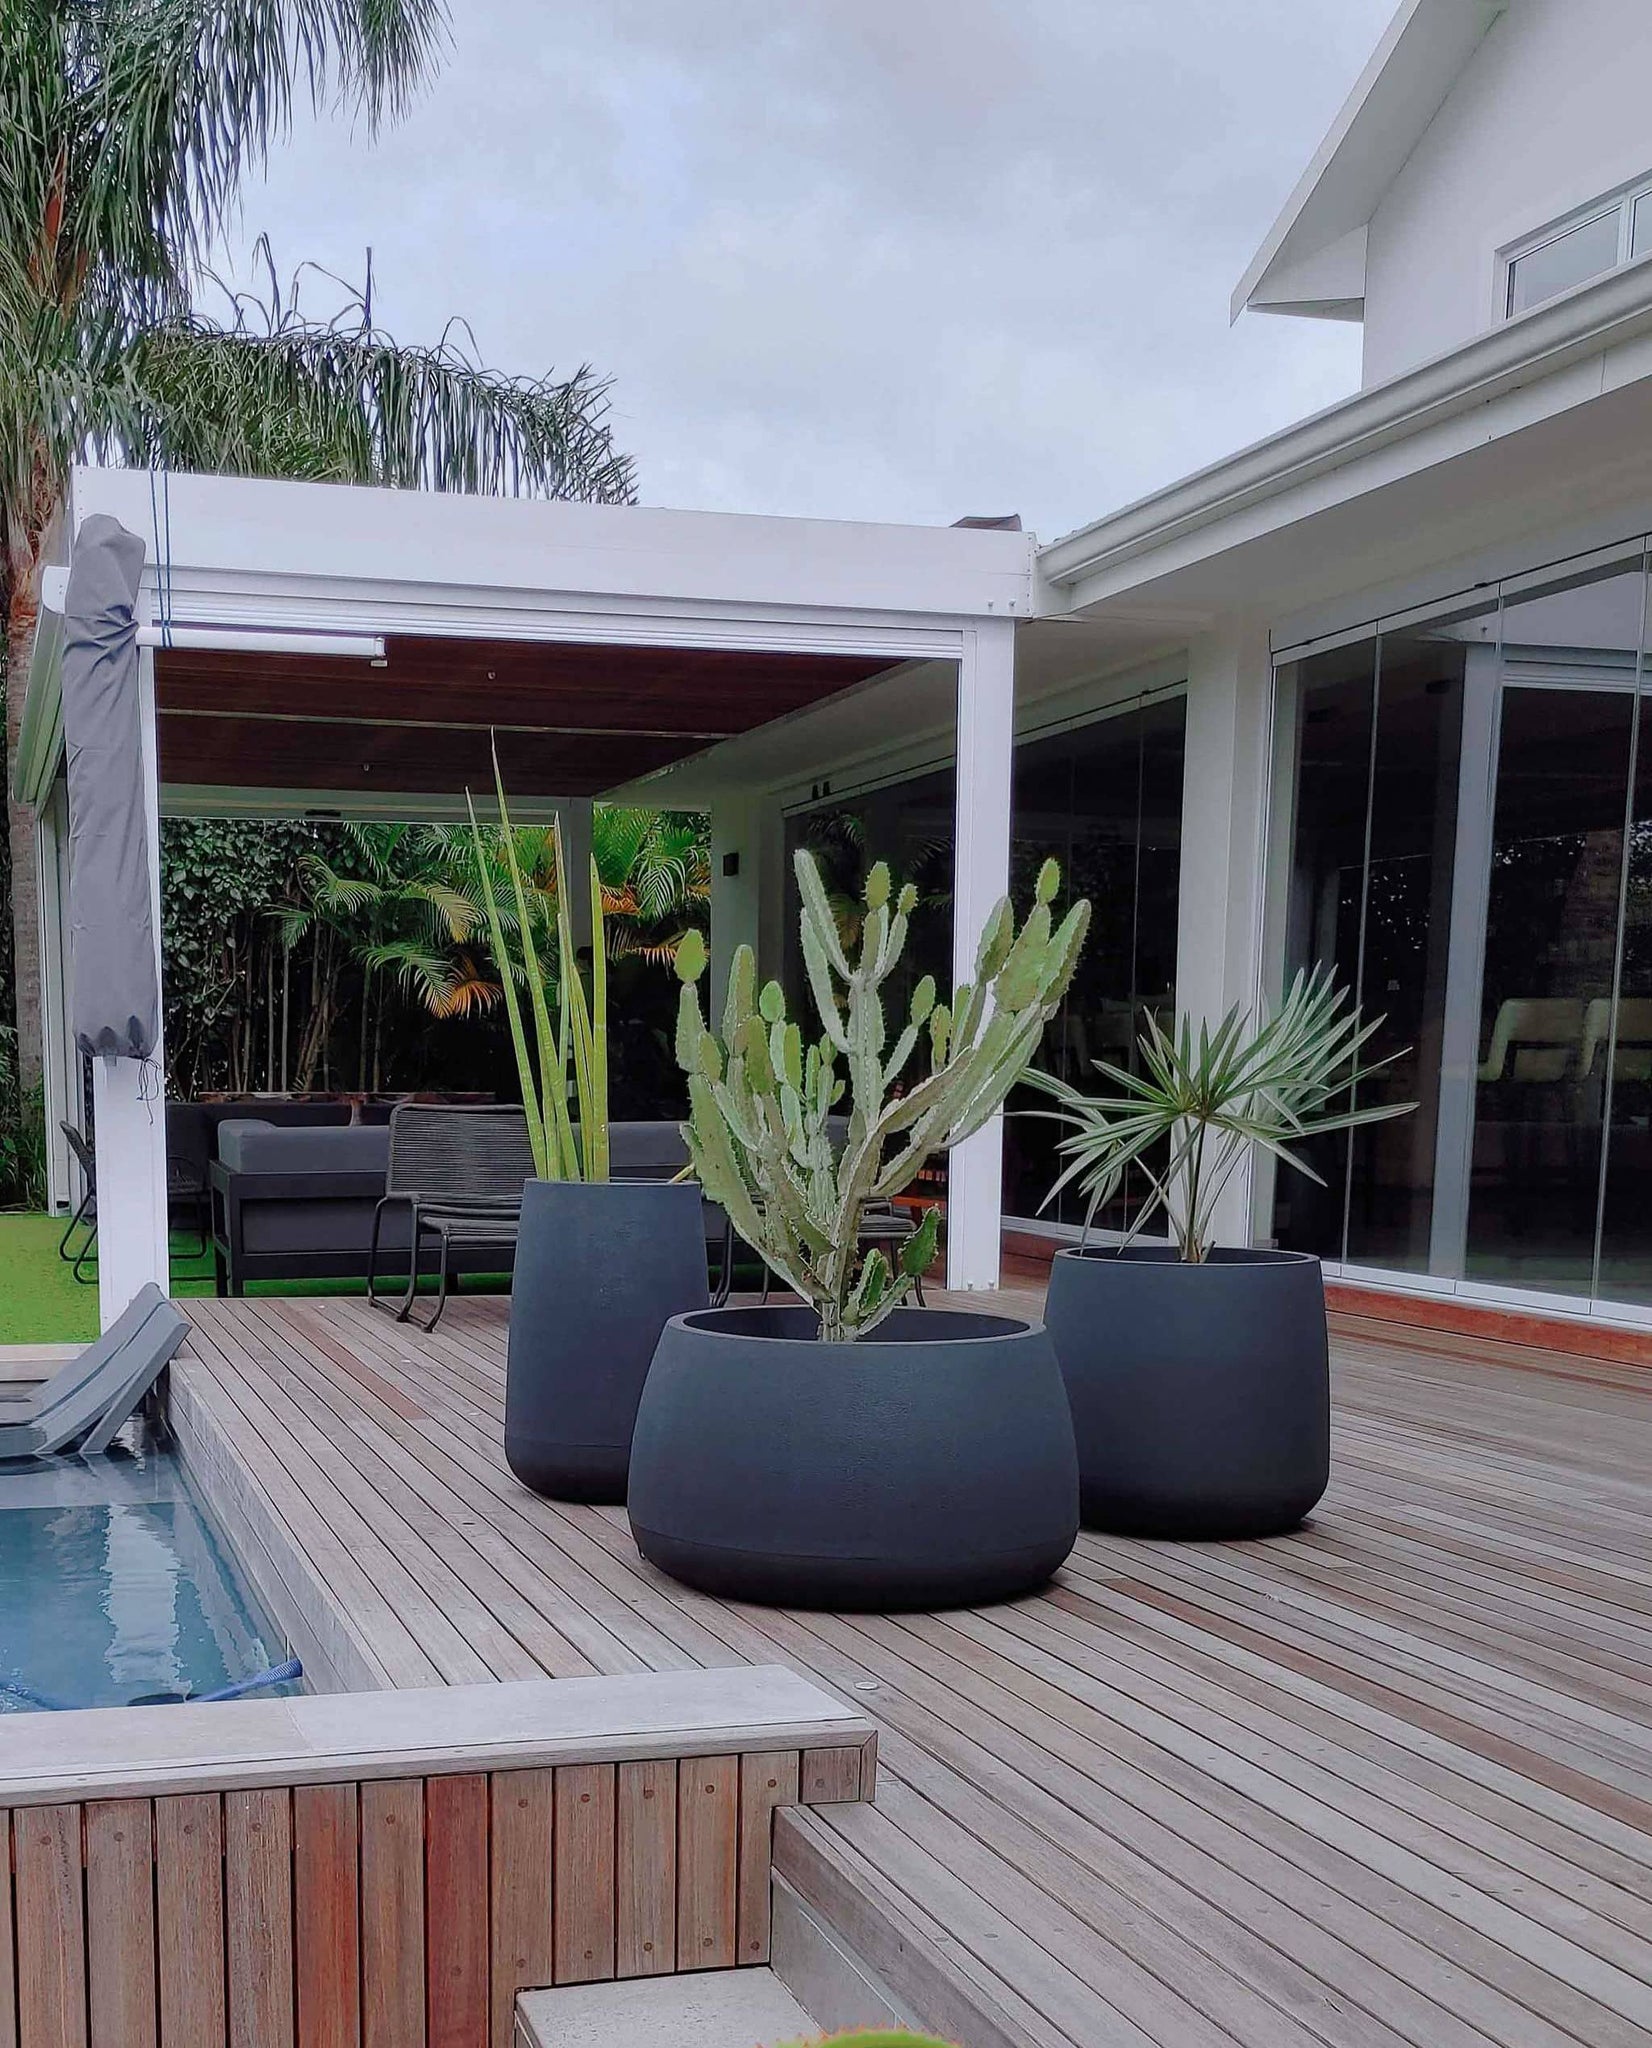 Fabulous planters, Bios Japi planters in the colour lead sold by Florastyle by Hingham. Styled on a wooden deck next to the swimming pool. Modern Contempory style. Sort after set of 3. 